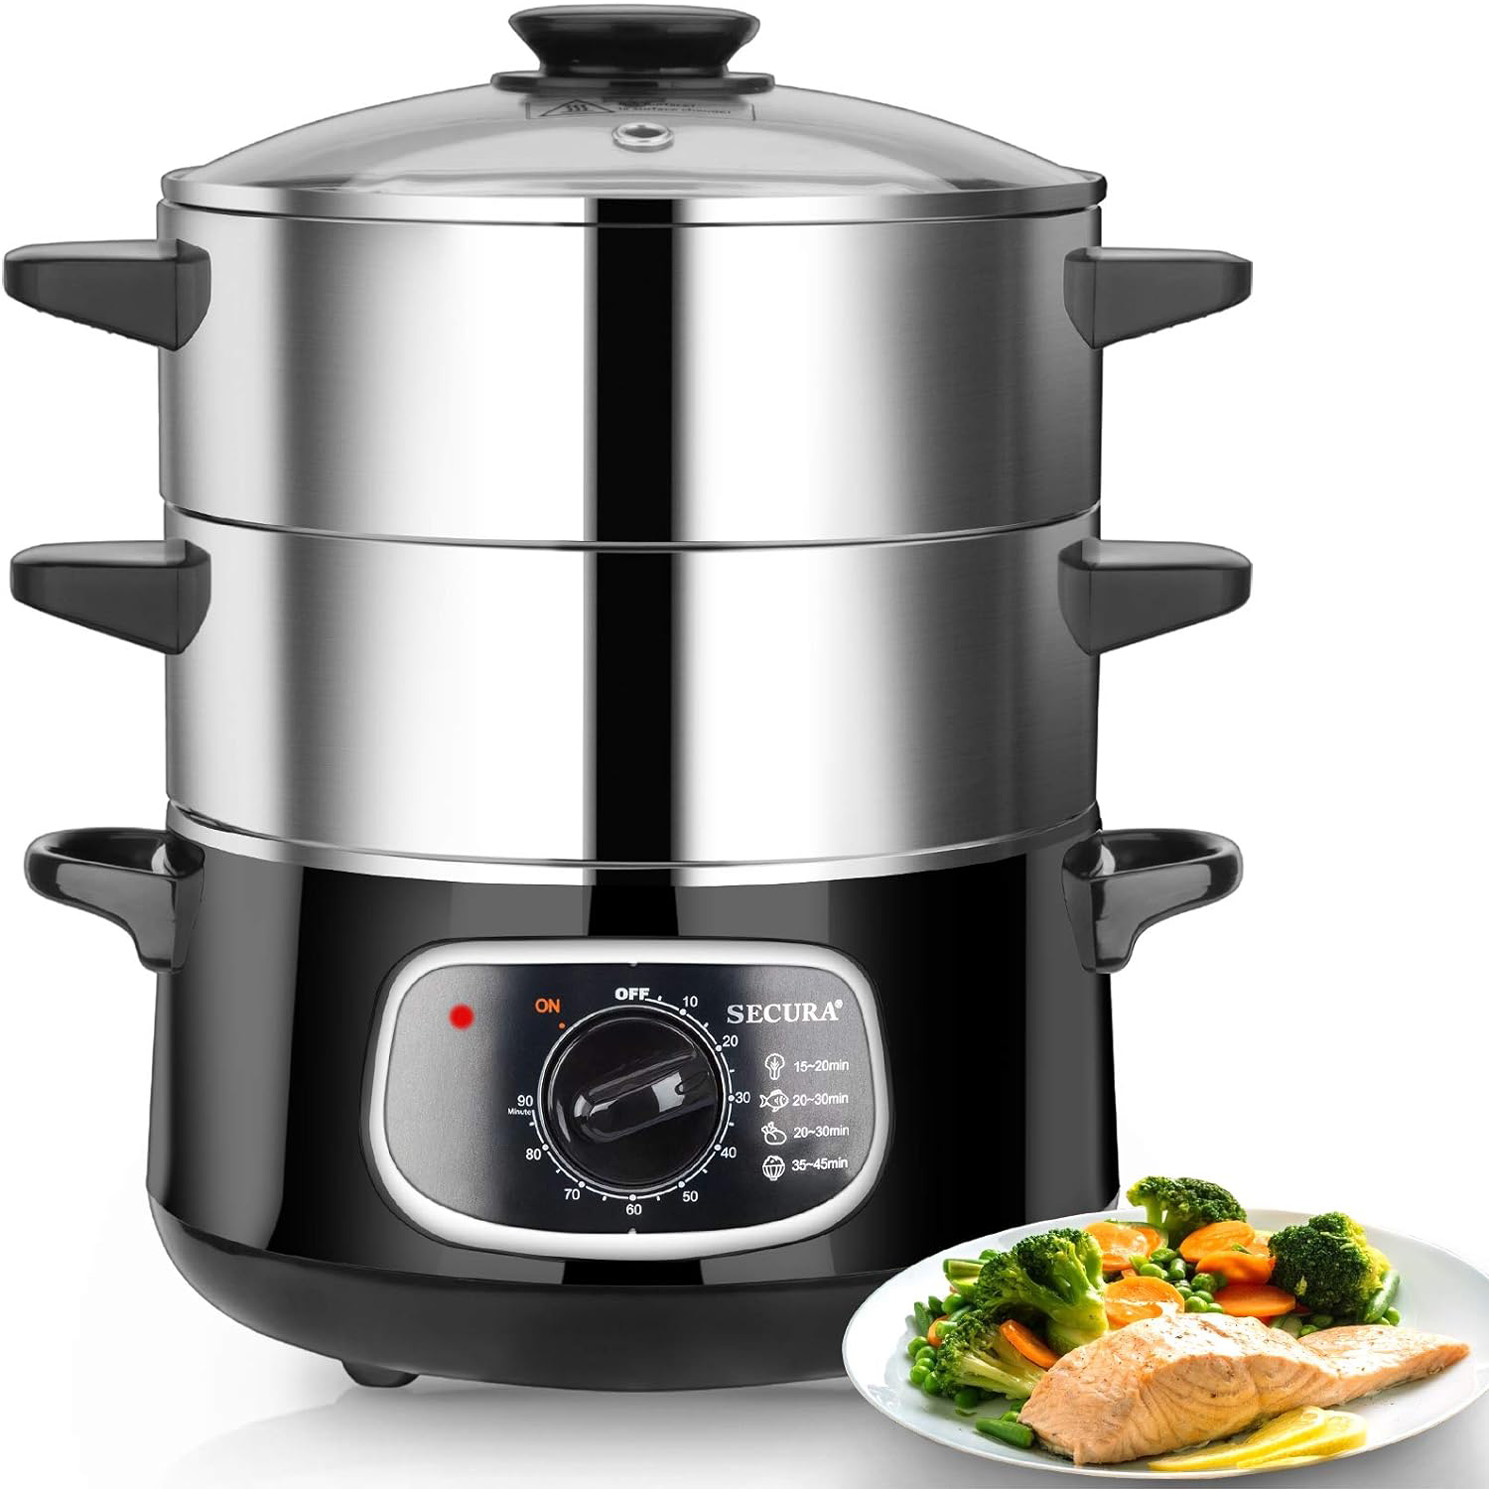 Secura 2 Stainless Steel Food Steamer 8.5 Qt